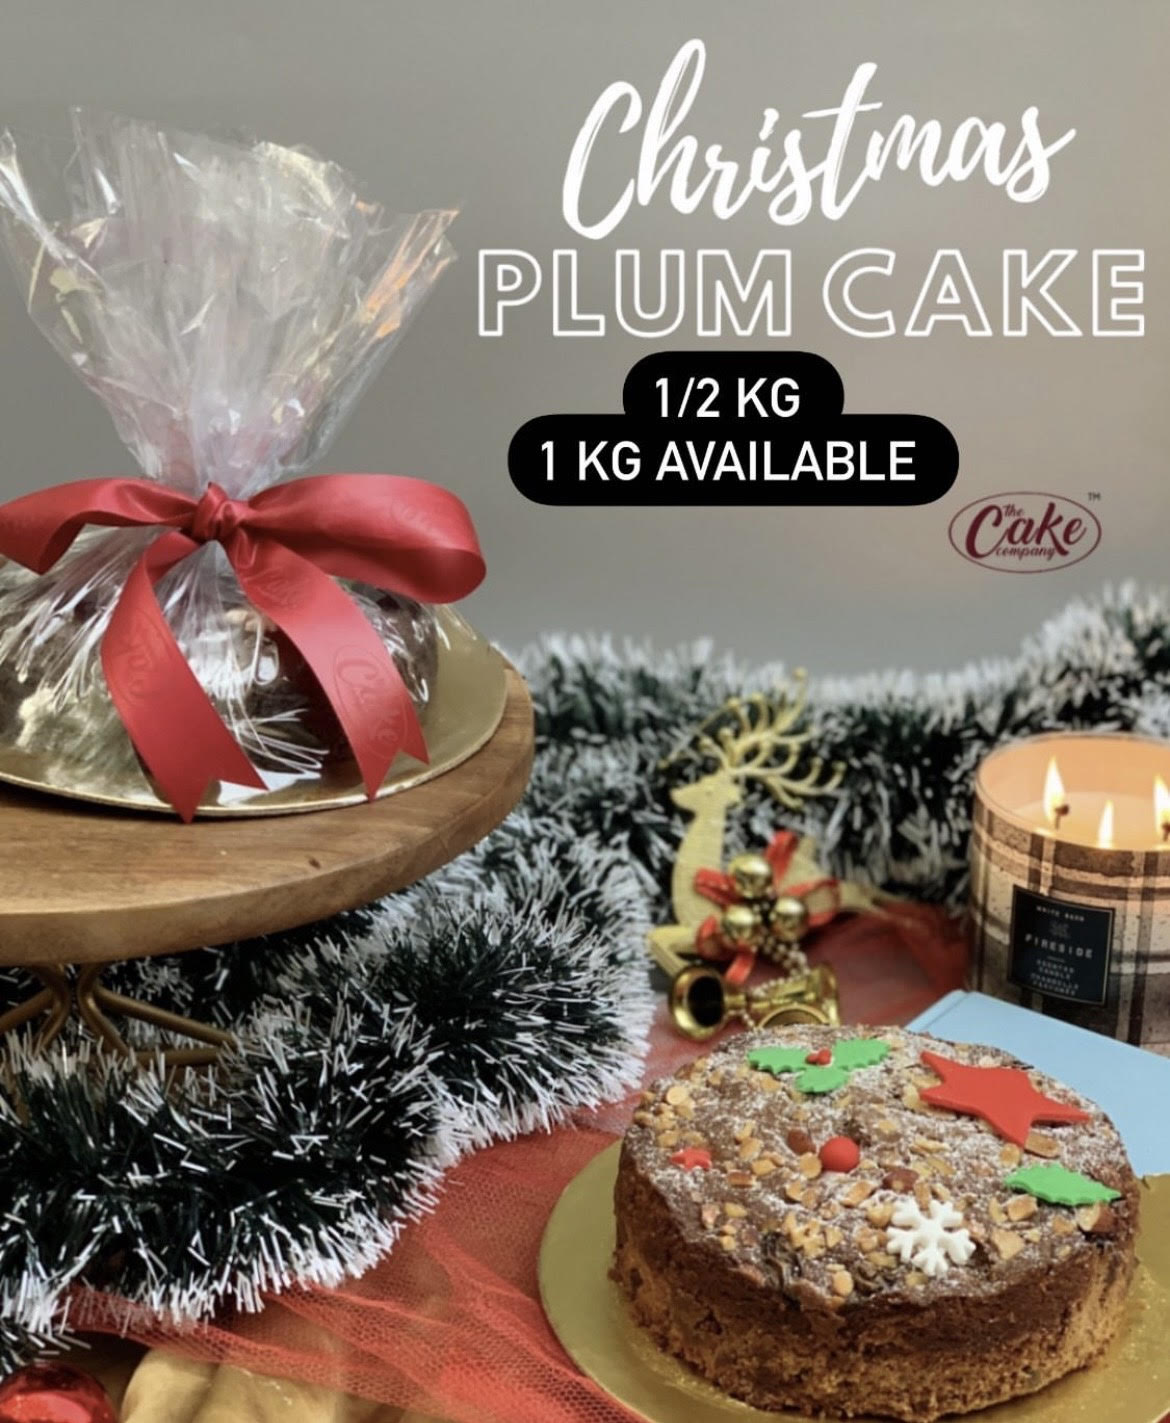 The Cake Company Has A Range Of Delicious Christmas Cakes For You!